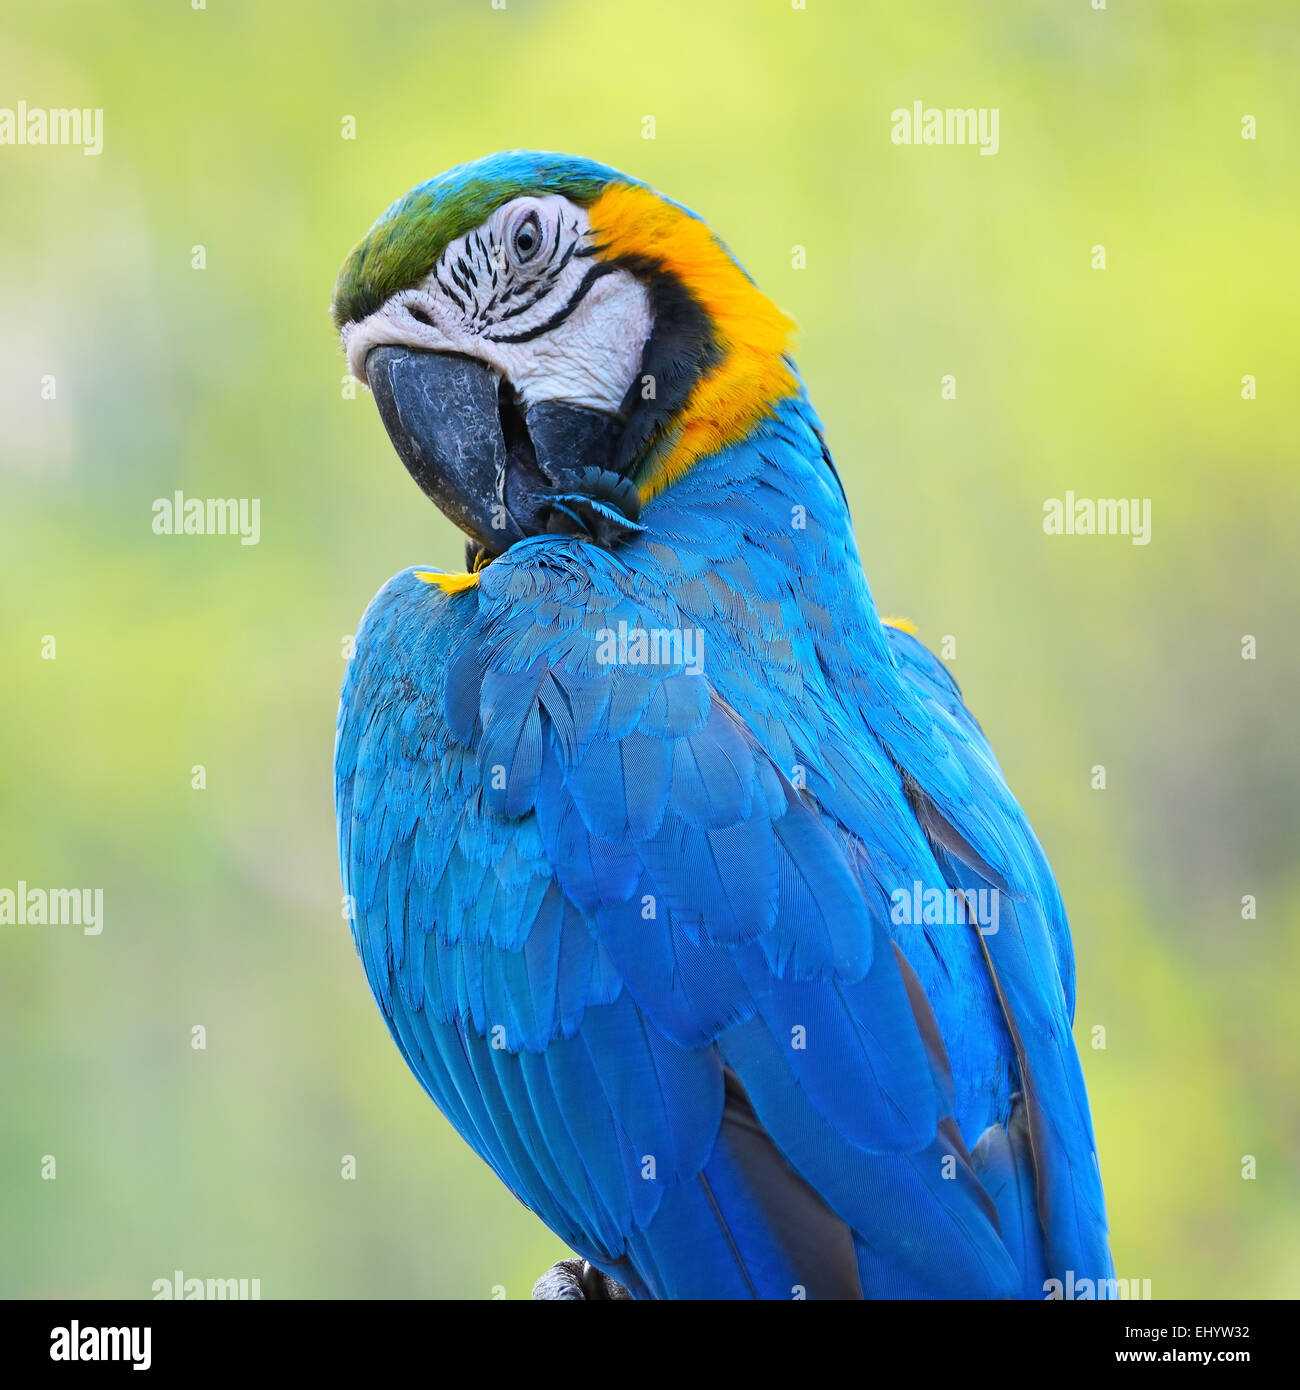 Beautiful parrot bird, Blue and Gold Macaw in portrait profile Stock Photo